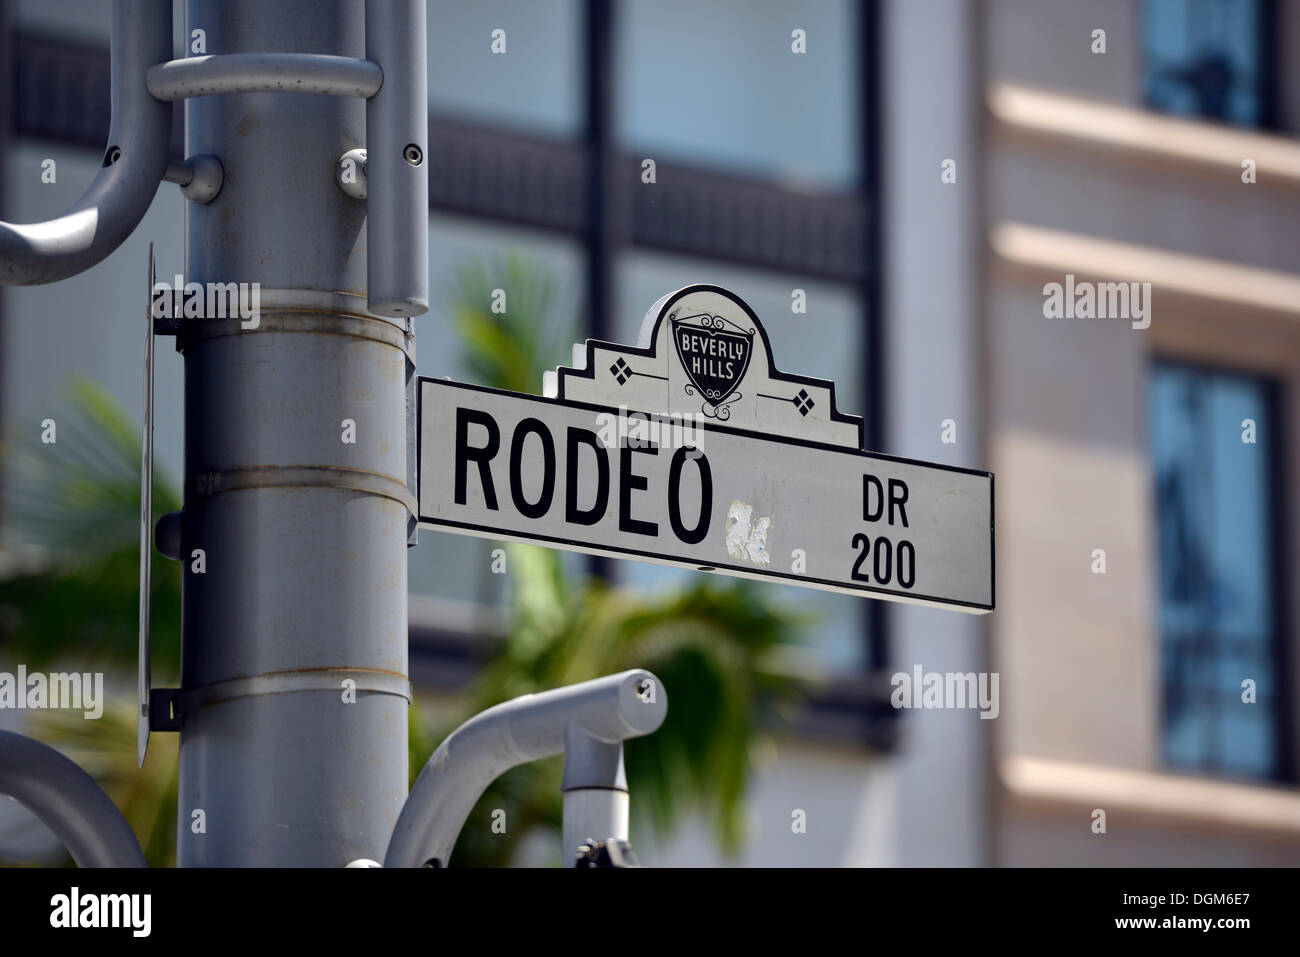 Rodeo Drive street sign, Rodeo Drive luxury shopping street, Beverly Hills, Los Angeles, California, United States of America Stock Photo